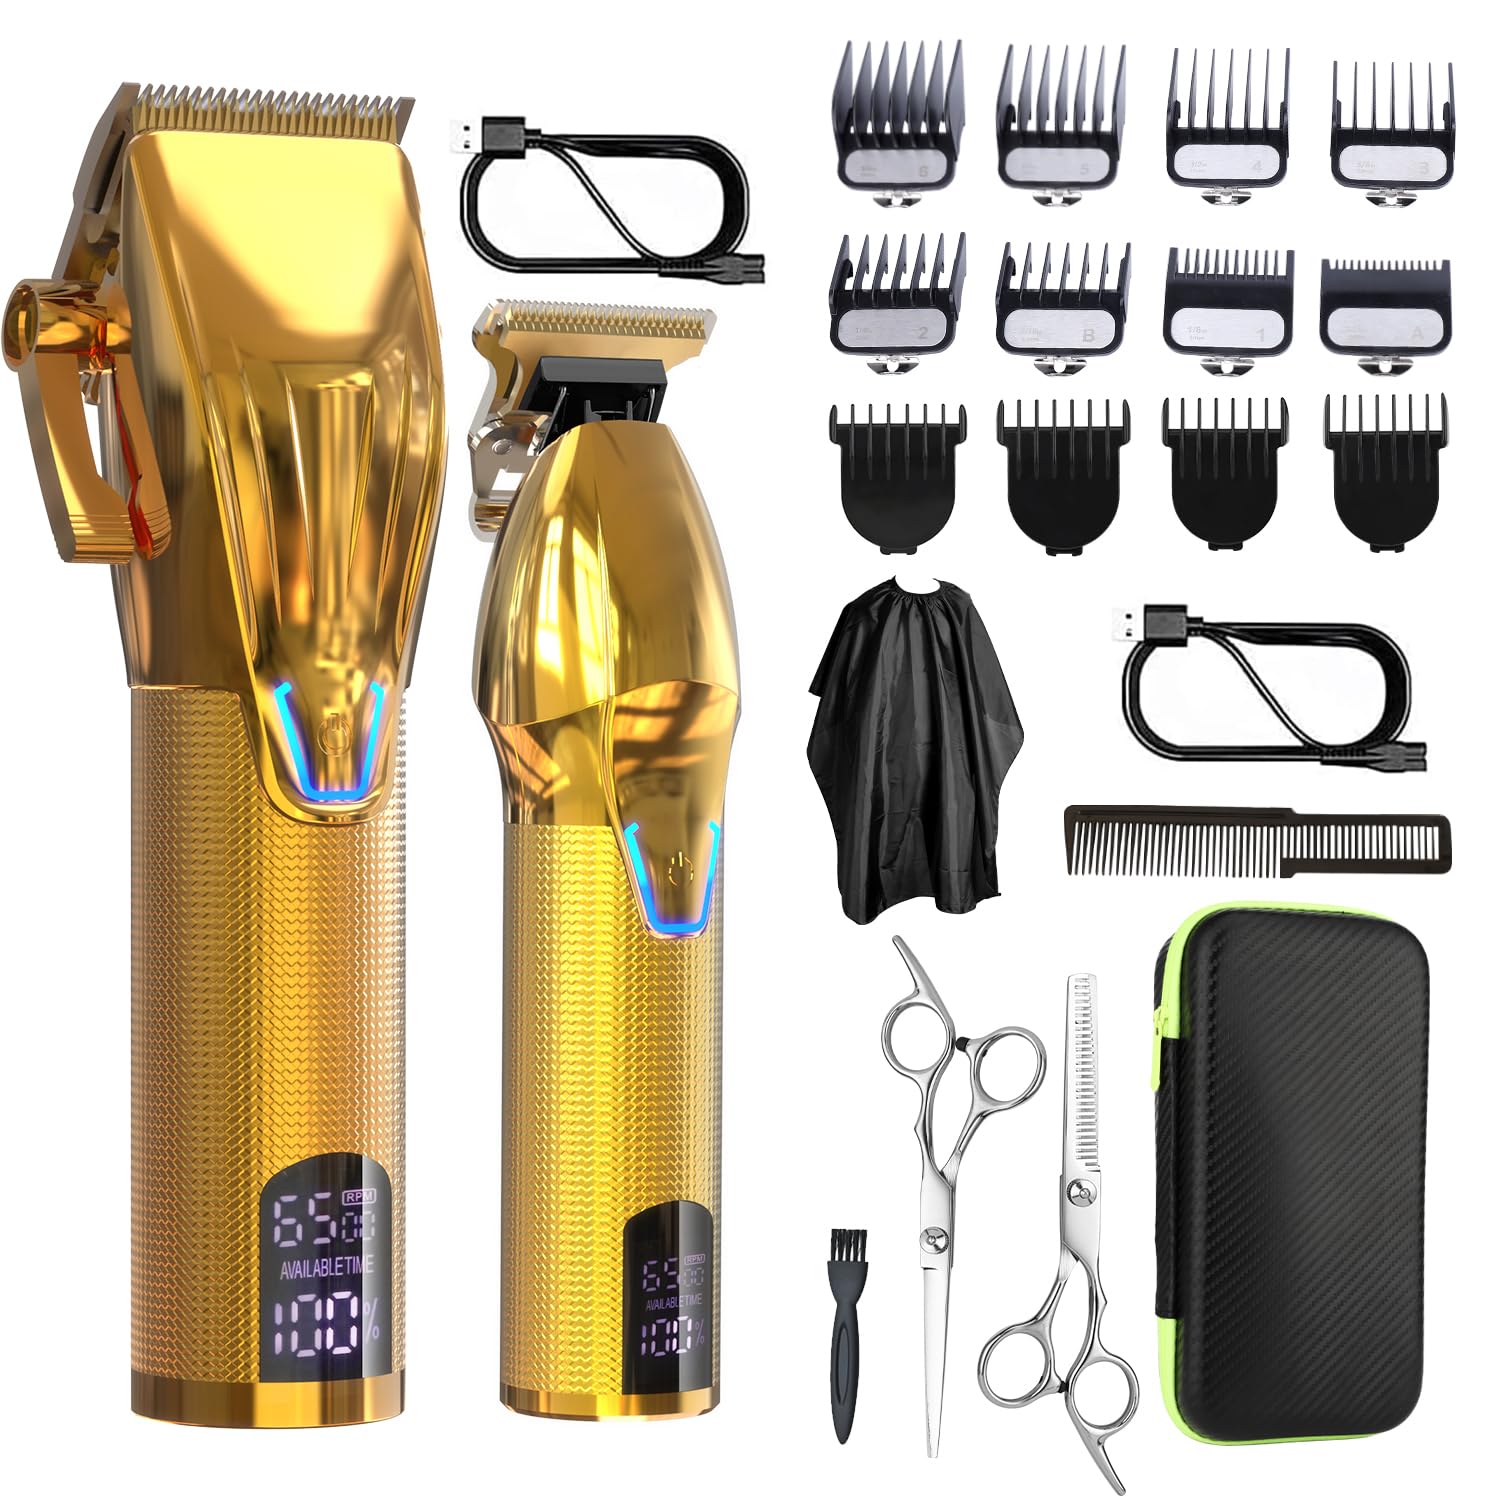 Elite Pro | Corded Hair Clippers for Home Use - Wahl EU